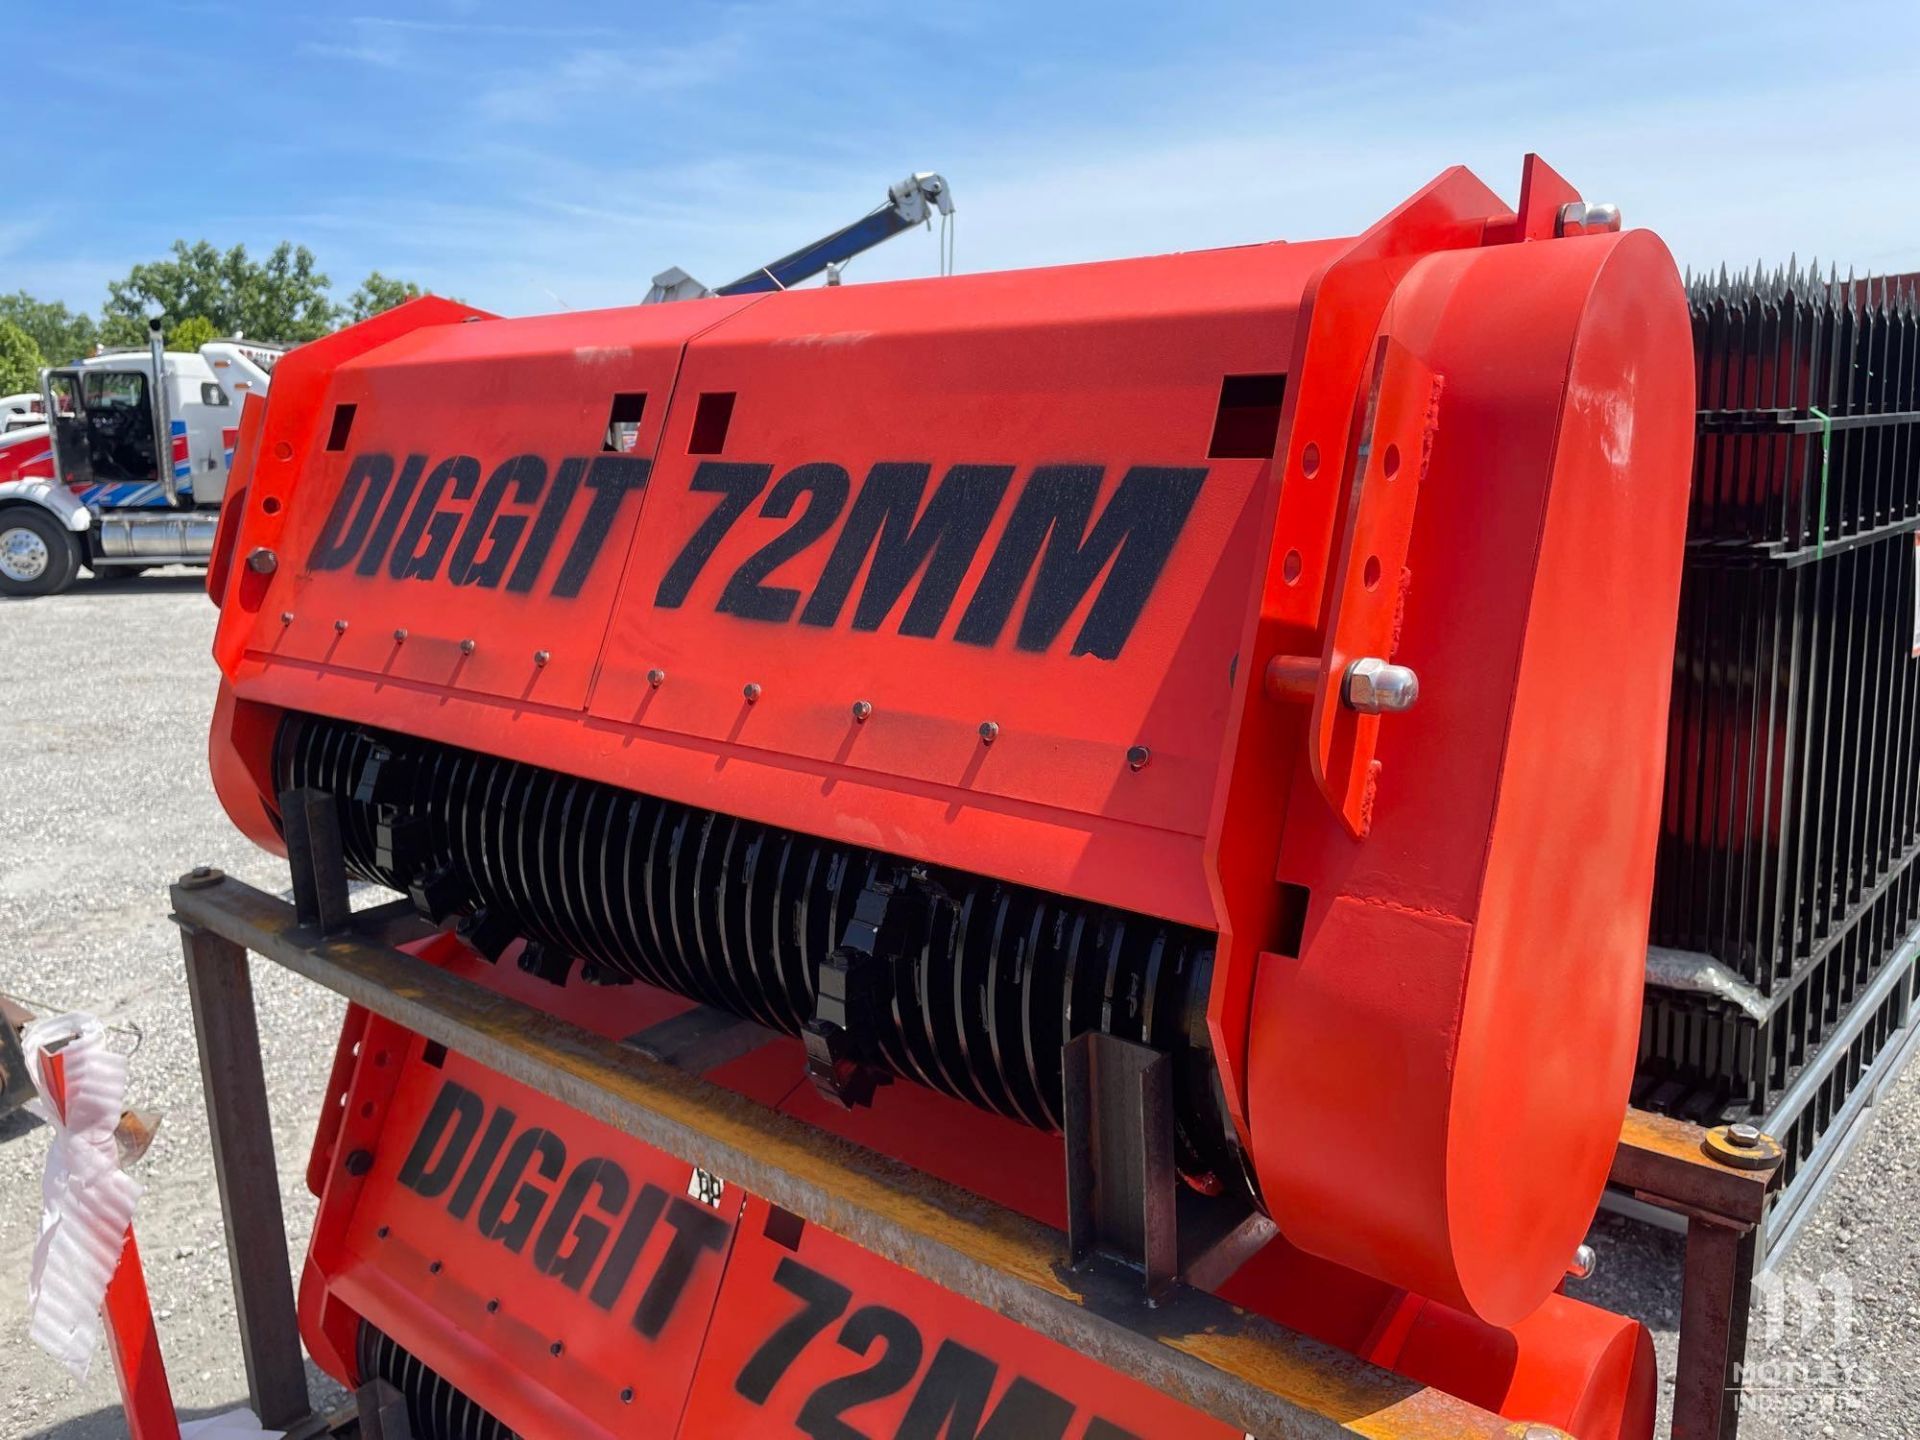 Diggit TH76 Forestry Mulcher - Image 2 of 6